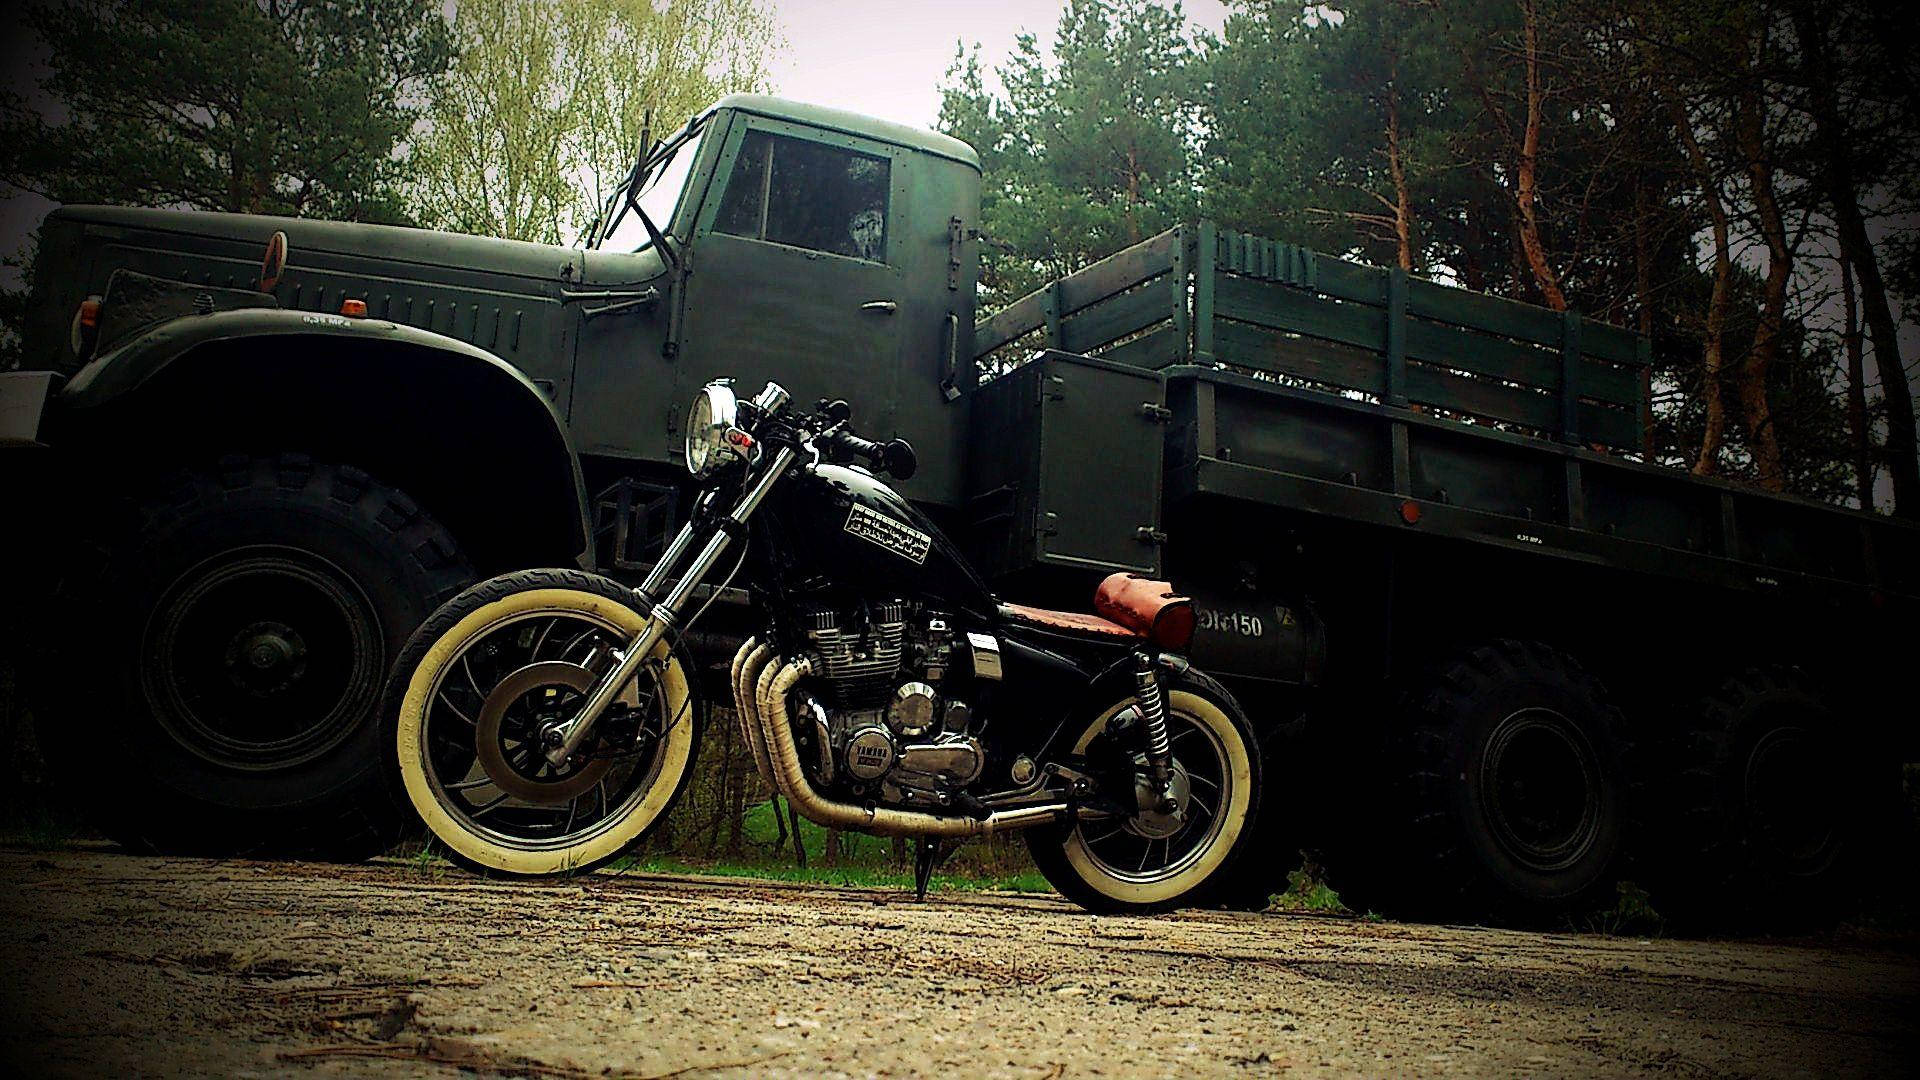 Bobber Motorcycle By An Army Truck Wallpaper